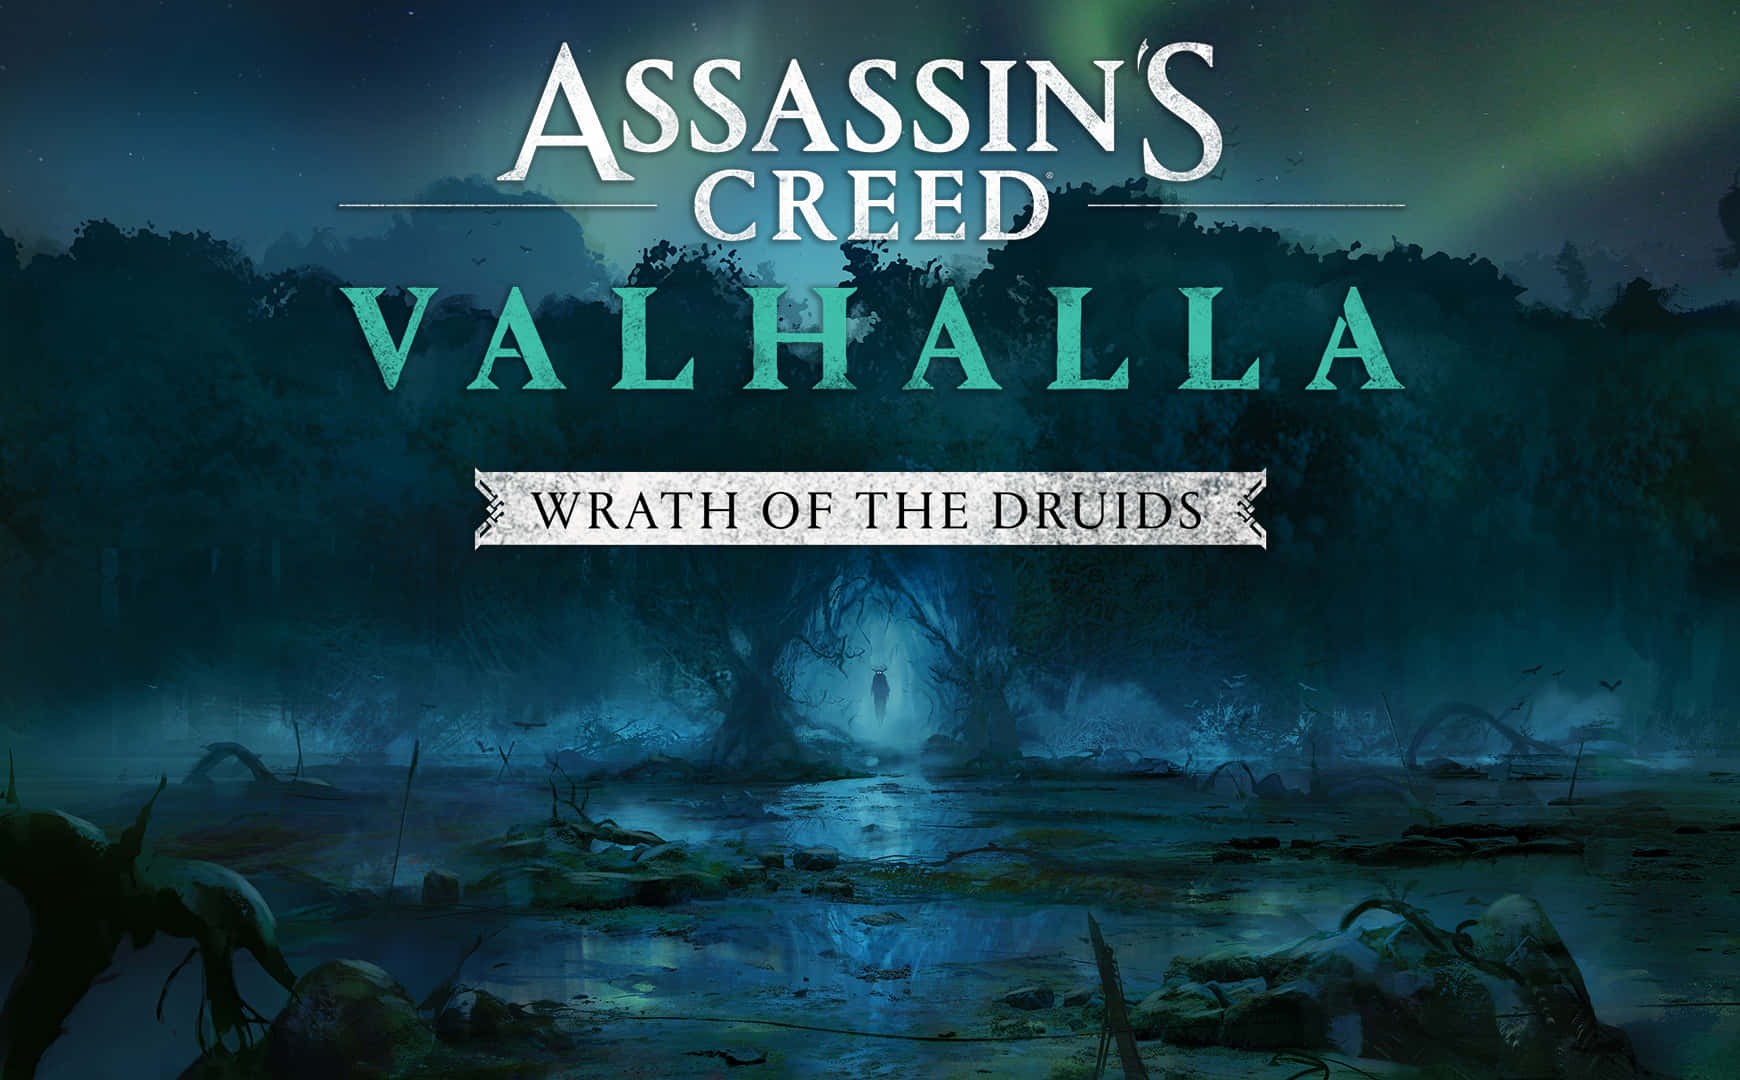 Assassin's Creed Valhalla Wrath Of The Druids